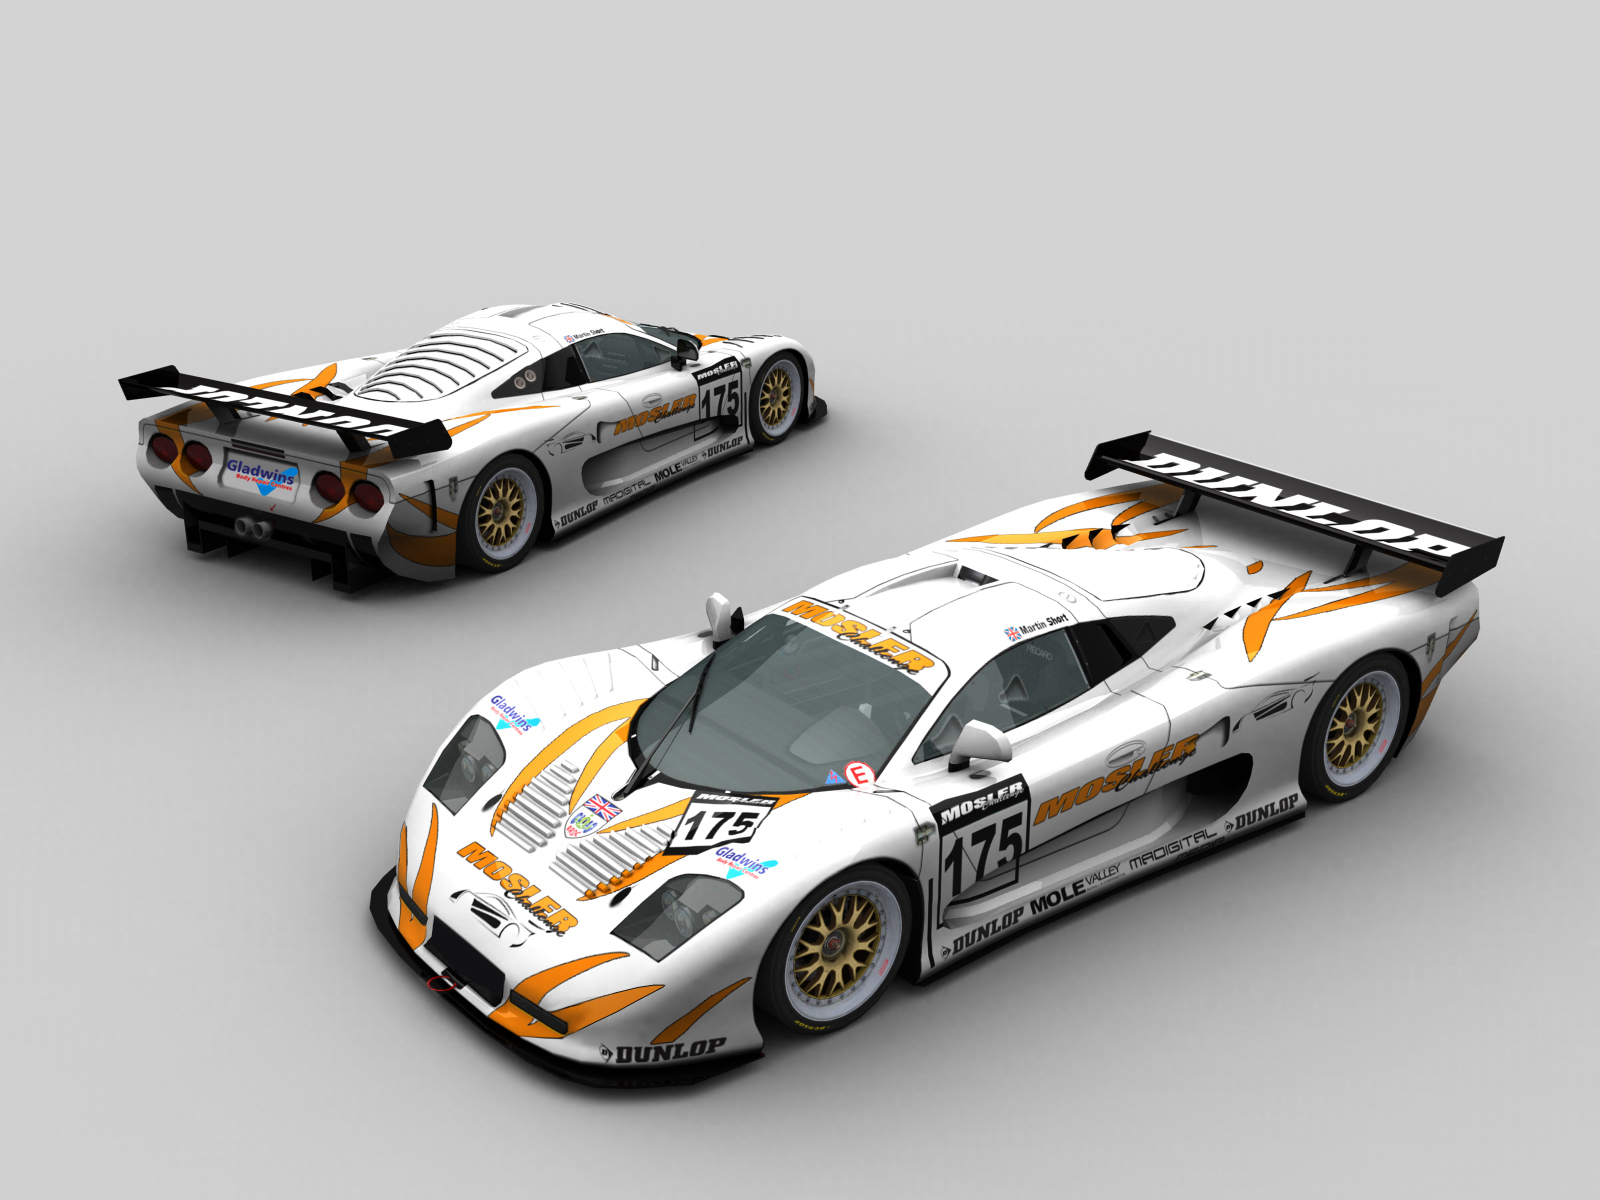 Next Mini Z Body is Mosler MT900 TRPScale